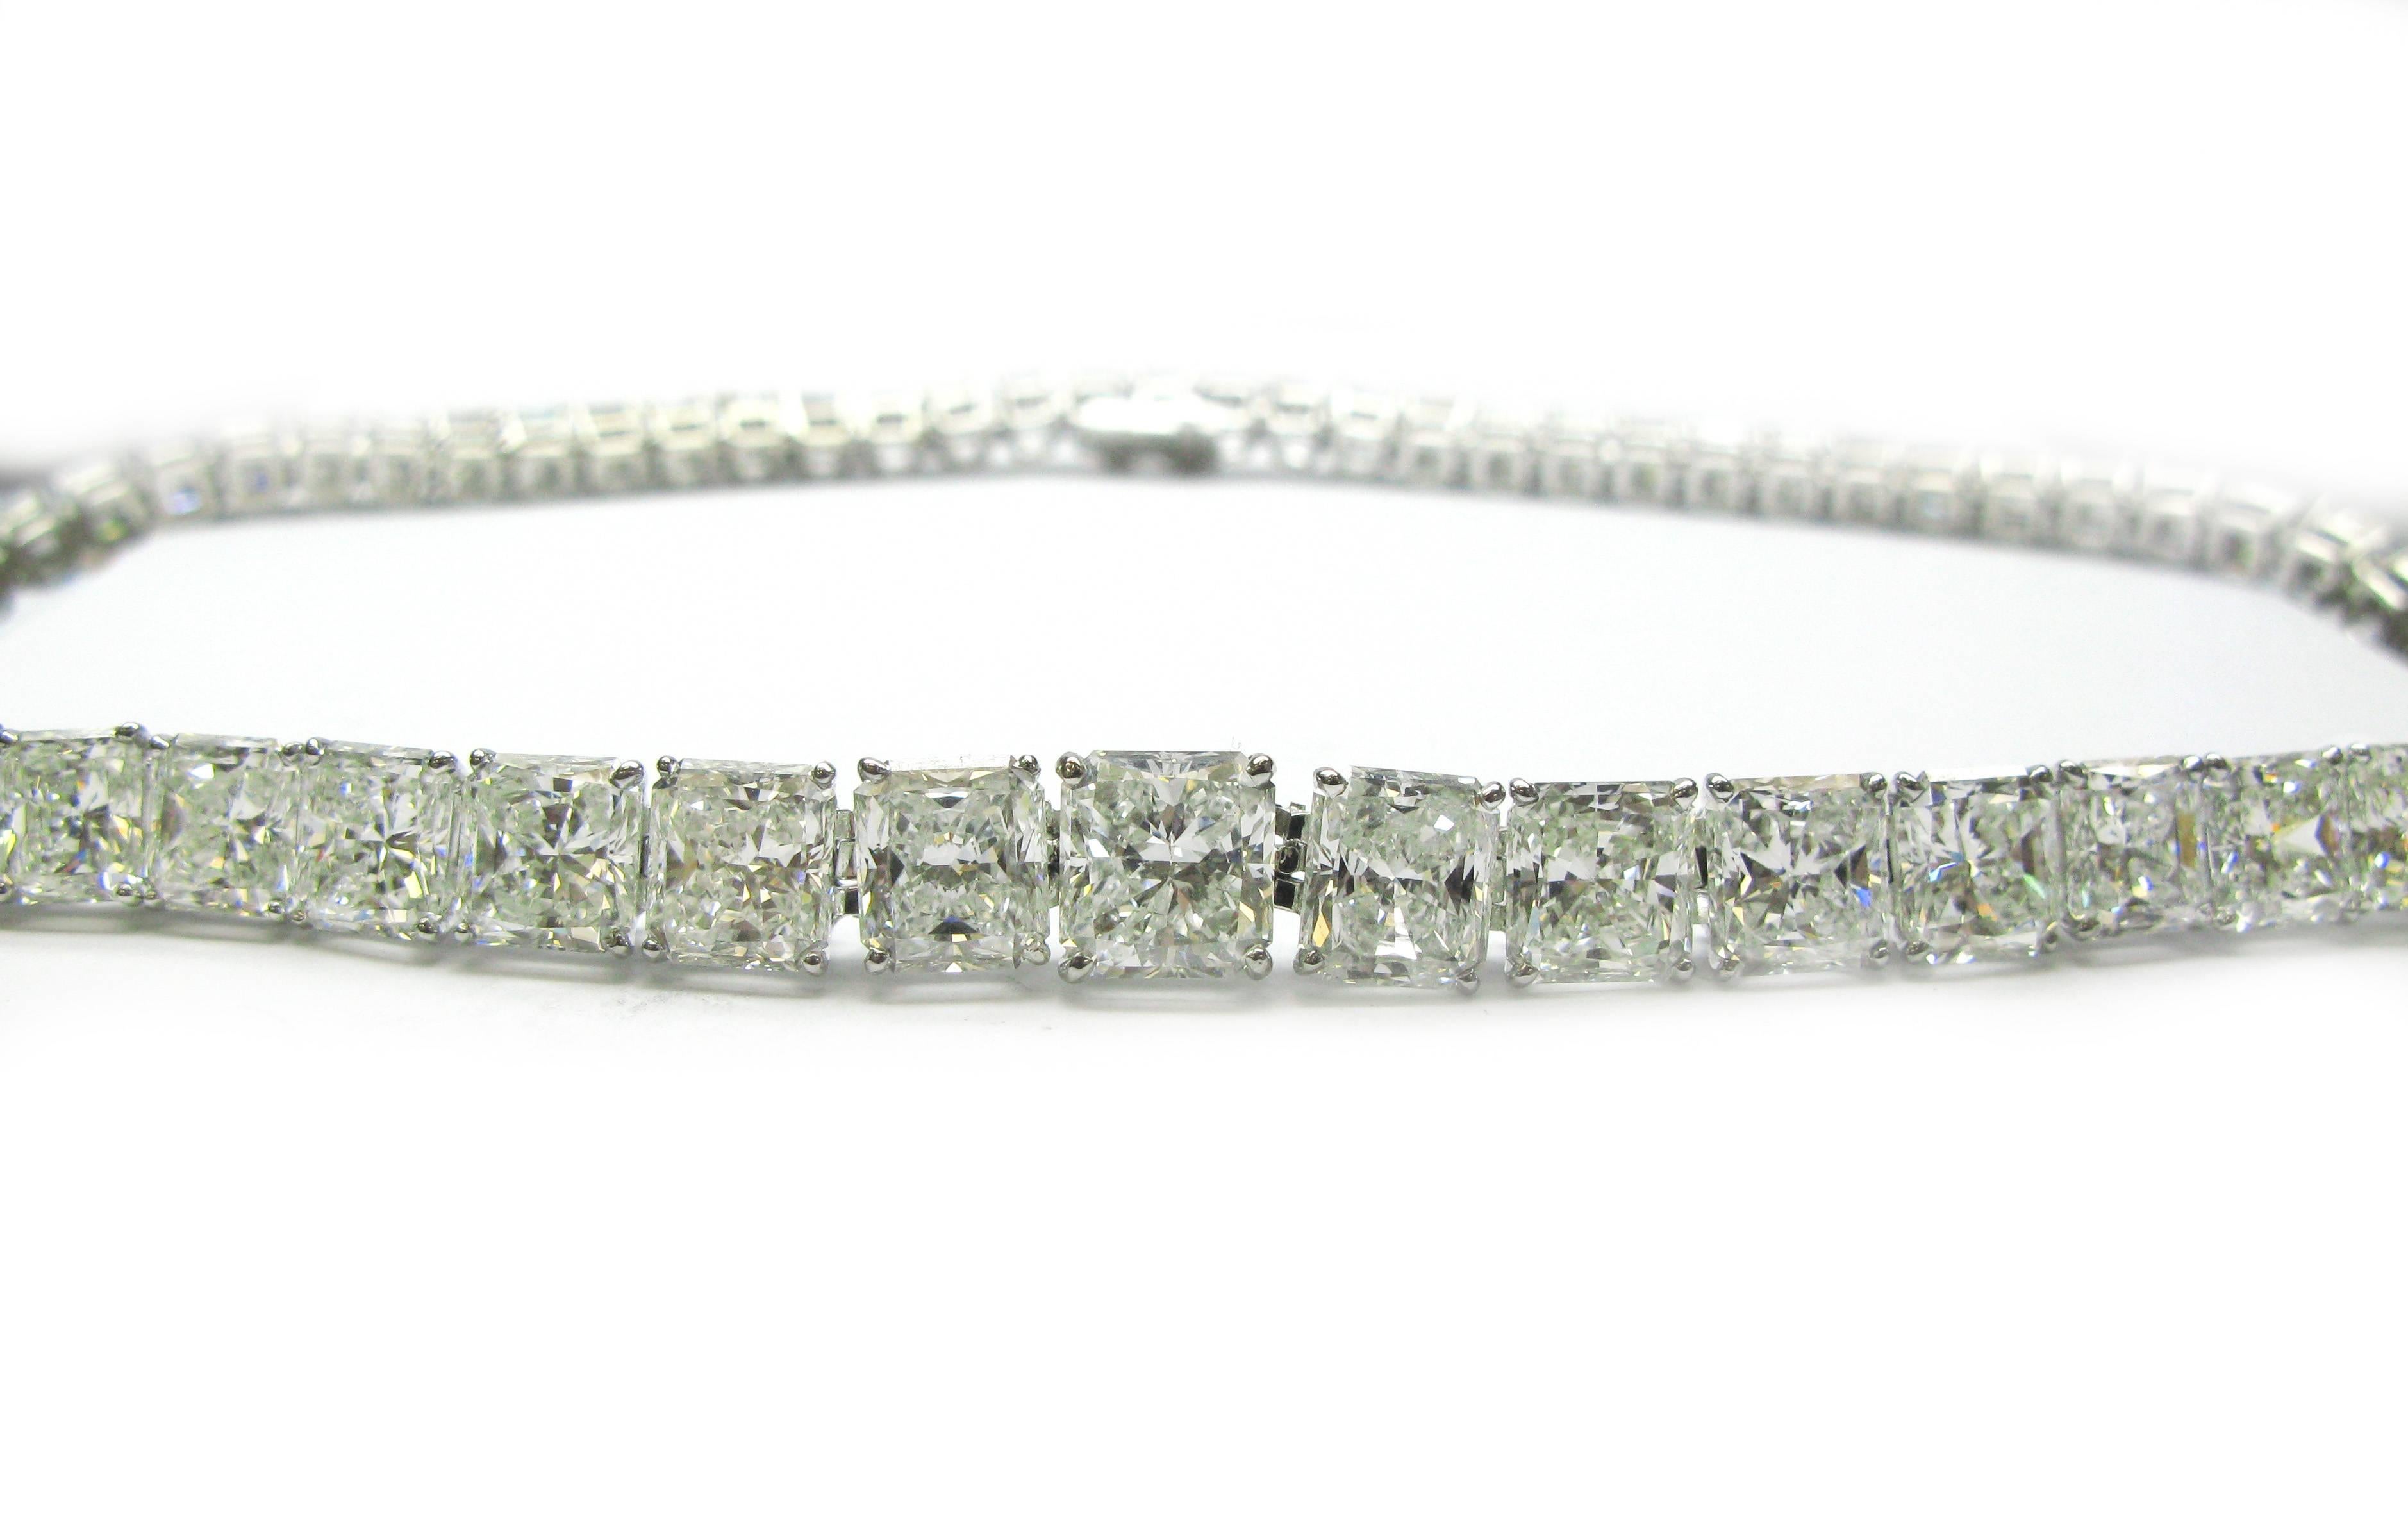 This remarkable handmade platinum necklace features 73 dazzling radiant cut diamonds graduating in size toward the center of the neck, totaling an impressive 77.69ctw. The center diamond is a GIA certified, 3.24ct, I color, VS2 clarity stone and the